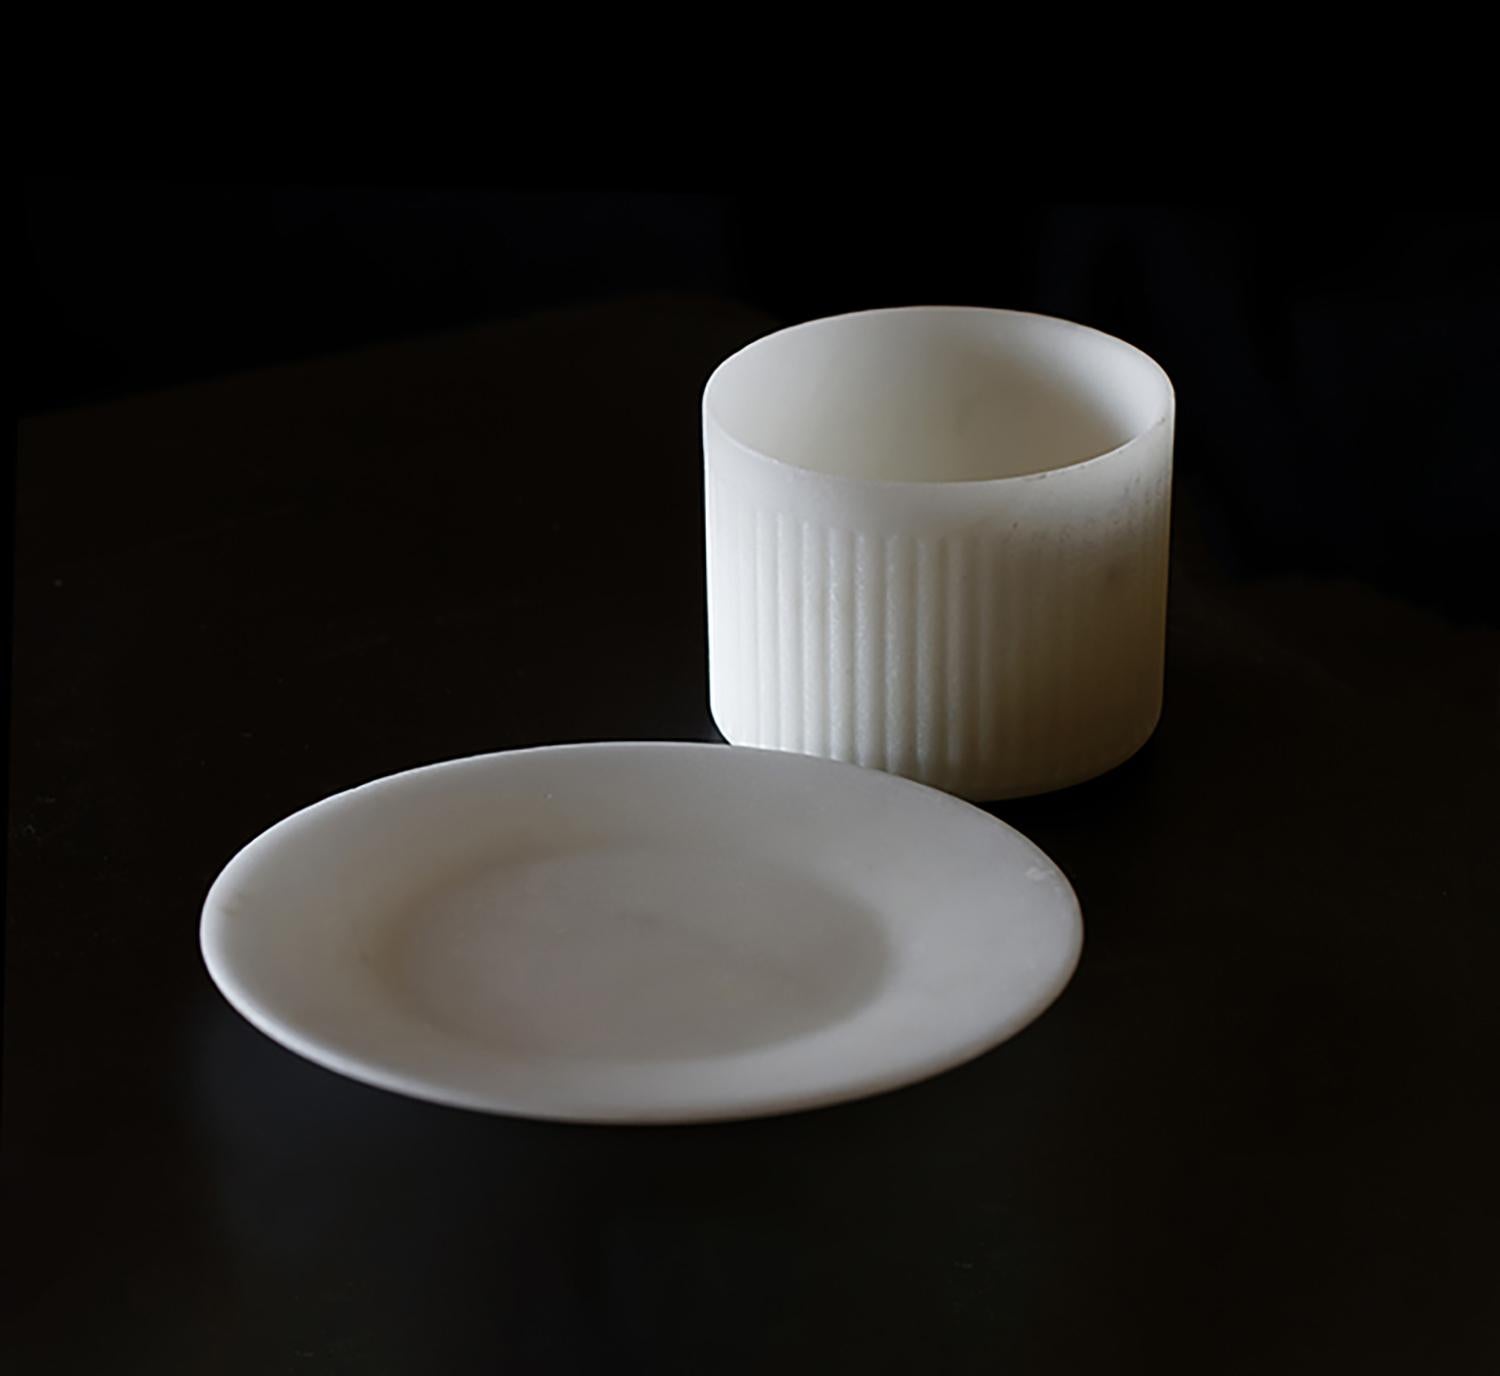 The rite of tea is made sculptural, stauary. The Statuary collection includes the milk cup with saucer, the large milk cup, the mug and the tea cup with saucer. A classic representation of an object that transforms marble into porcelain, aspiring to